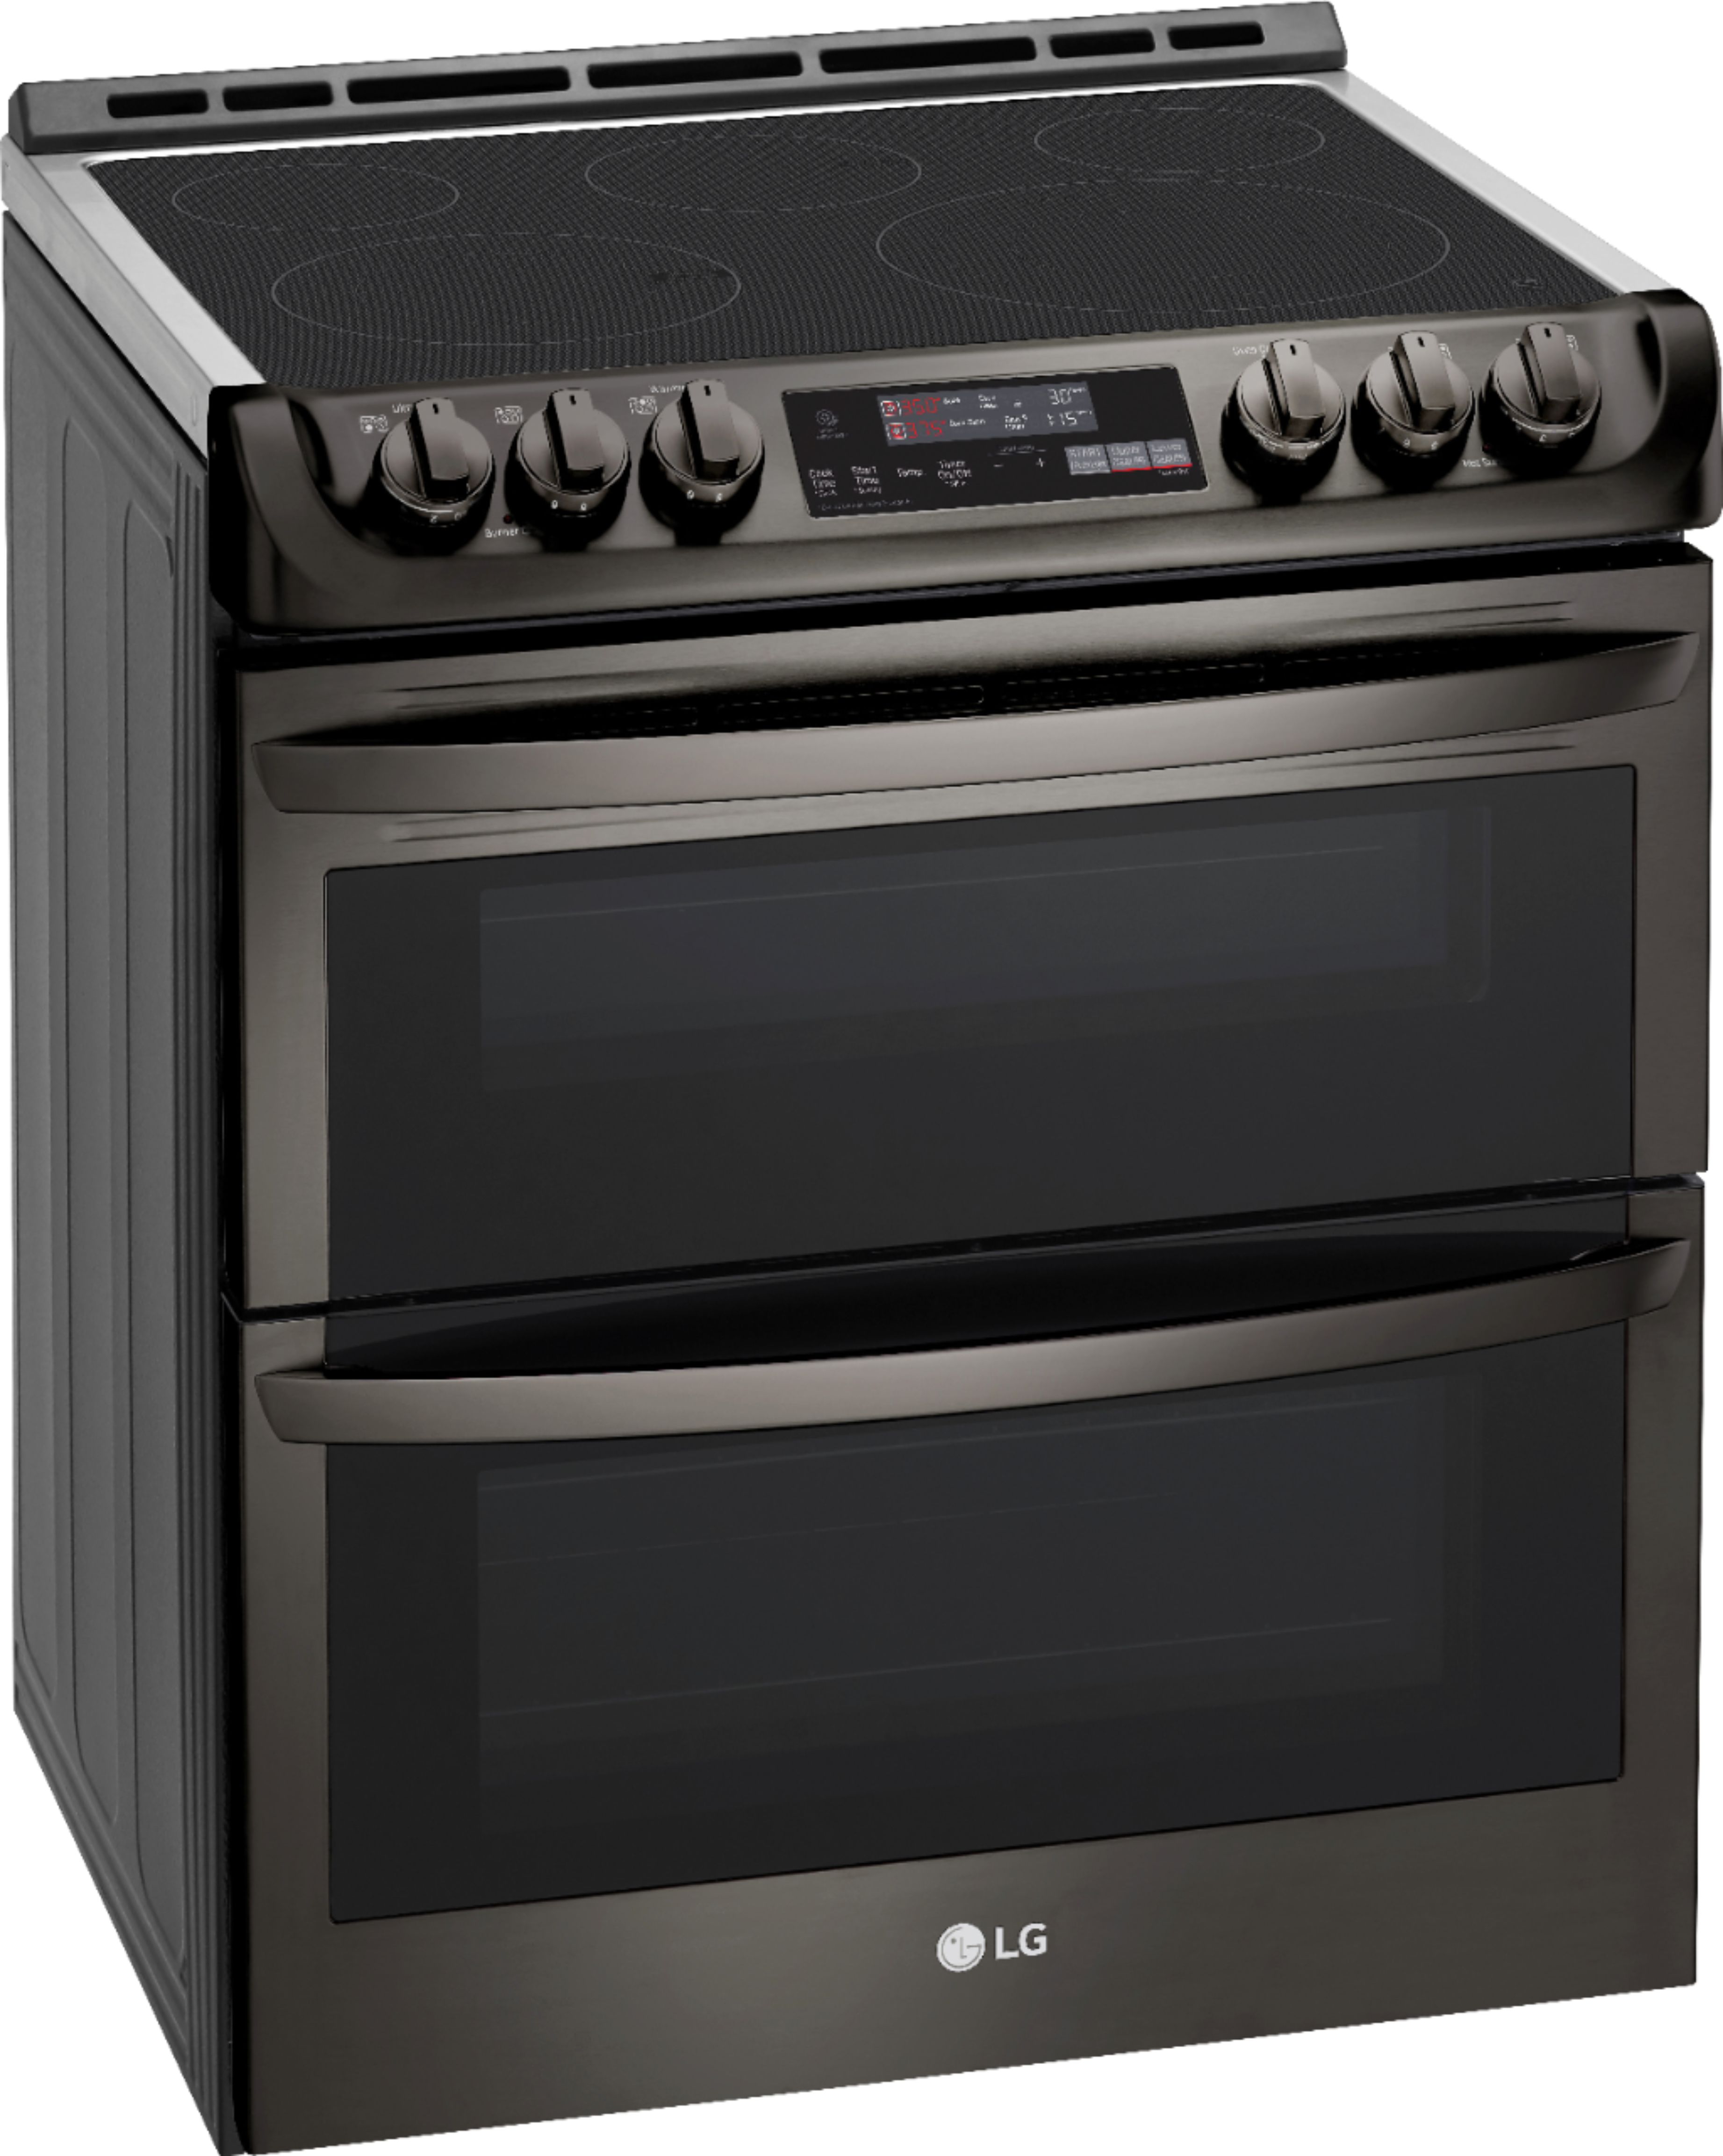 Angle View: LG - 7.3 Cu. Ft. Smart Slide-In Double Oven Electric True Convection Range with EasyClean and 3-in-1 Element - Black stainless steel